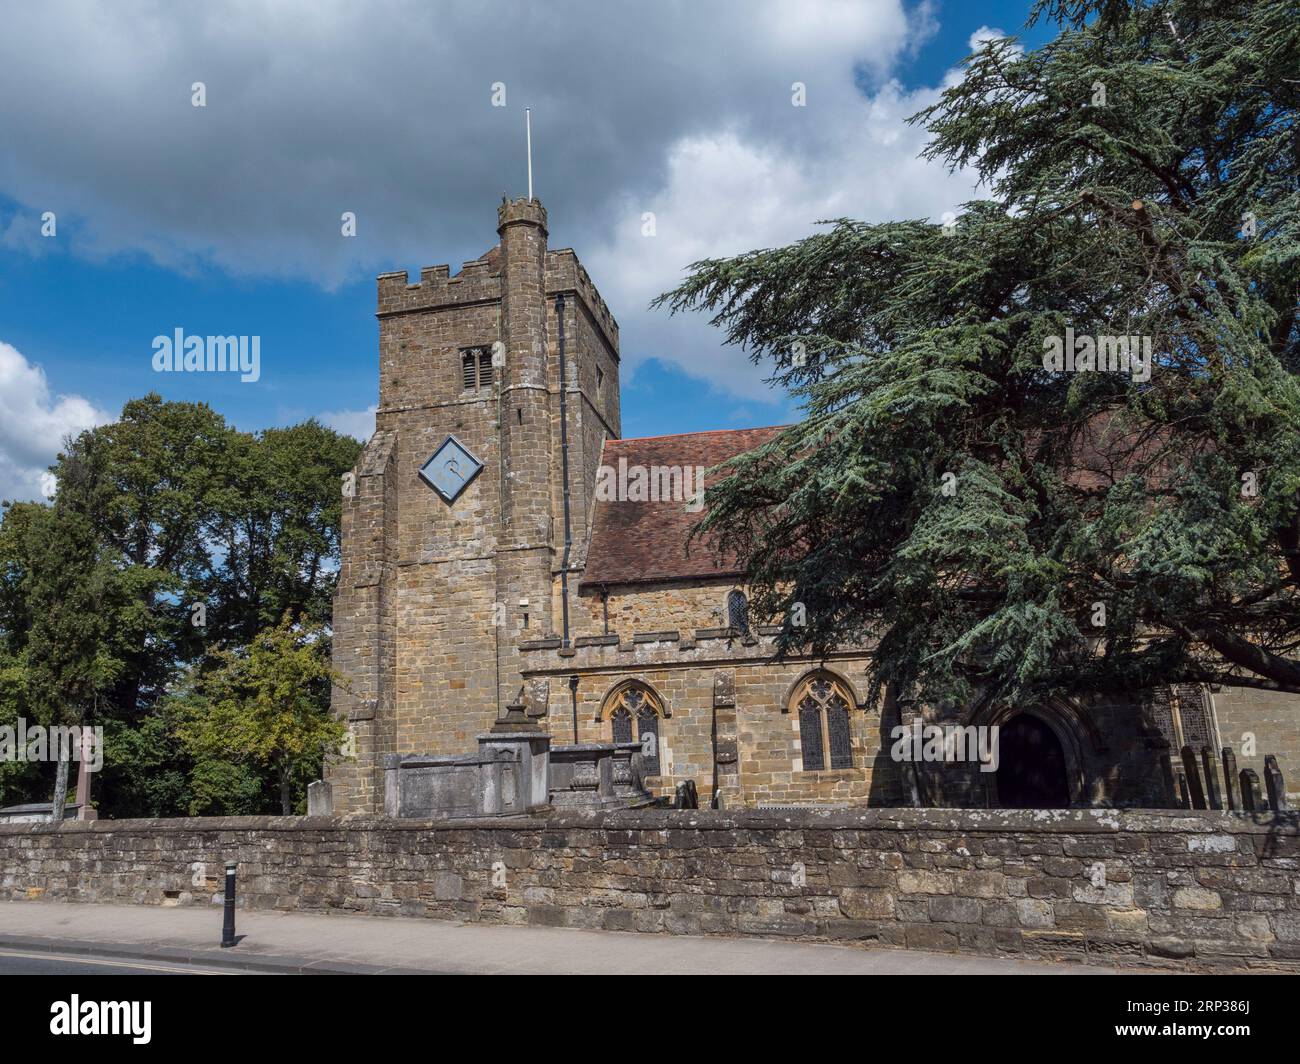 The Church of St Mary the Virgin in Battle (site of the 1066 Battle of Hastings), East Sussex, UK. Stock Photo